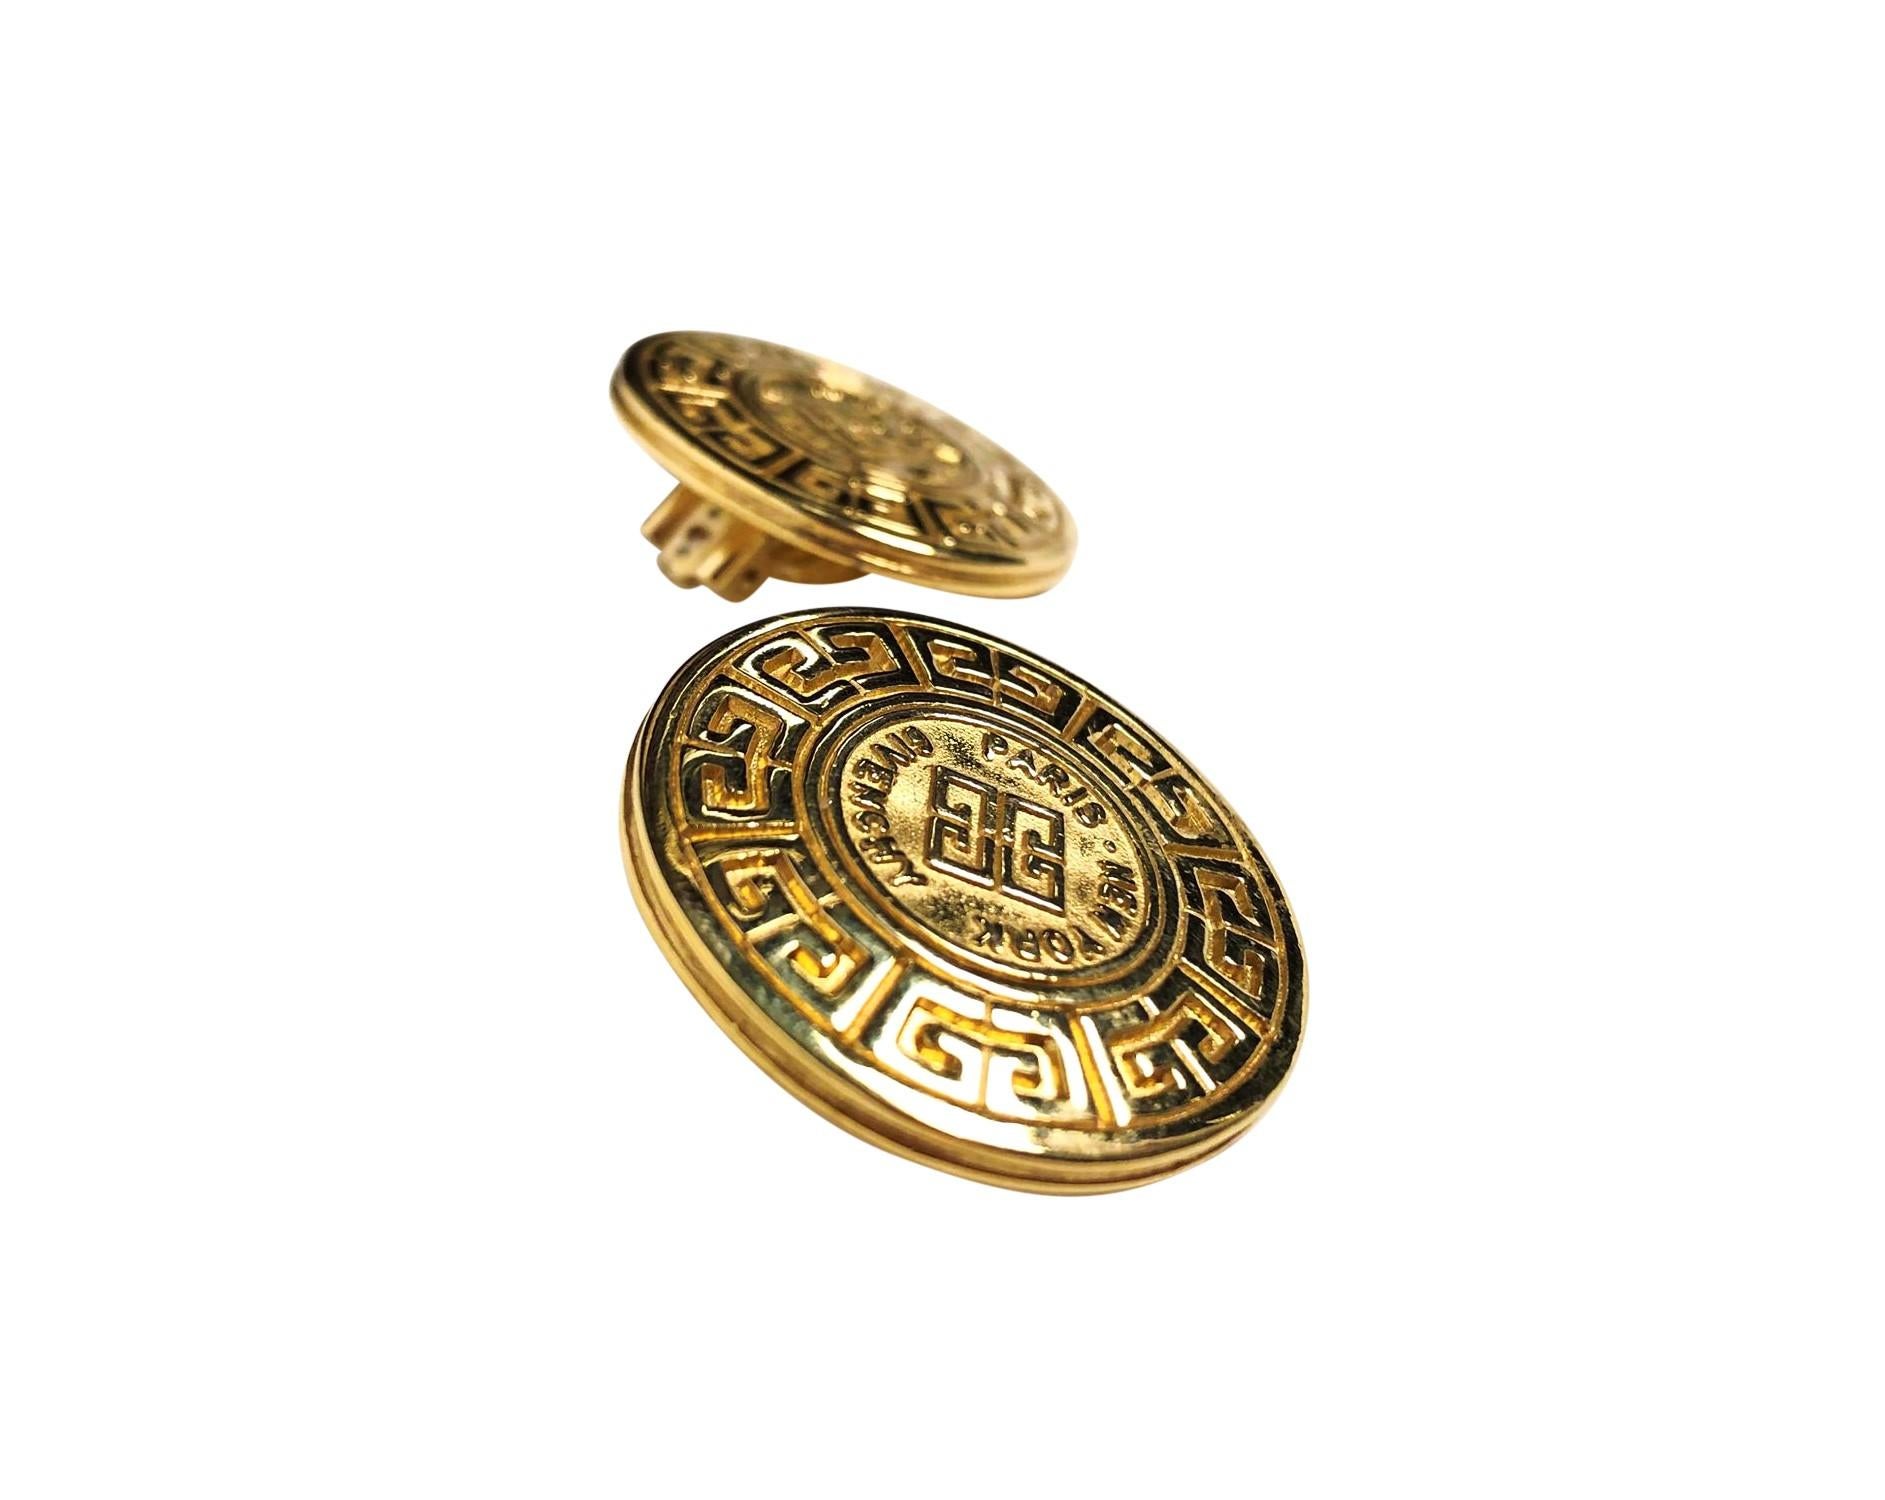 Iconic vintage Givenchy medallion clip on earrings in gold toned metal. These earrings feature Givenchy logo embellishments with GIVENCHY PARIS NEW YORK engravings on front and backs of earrings. 
3.3cm in diameter